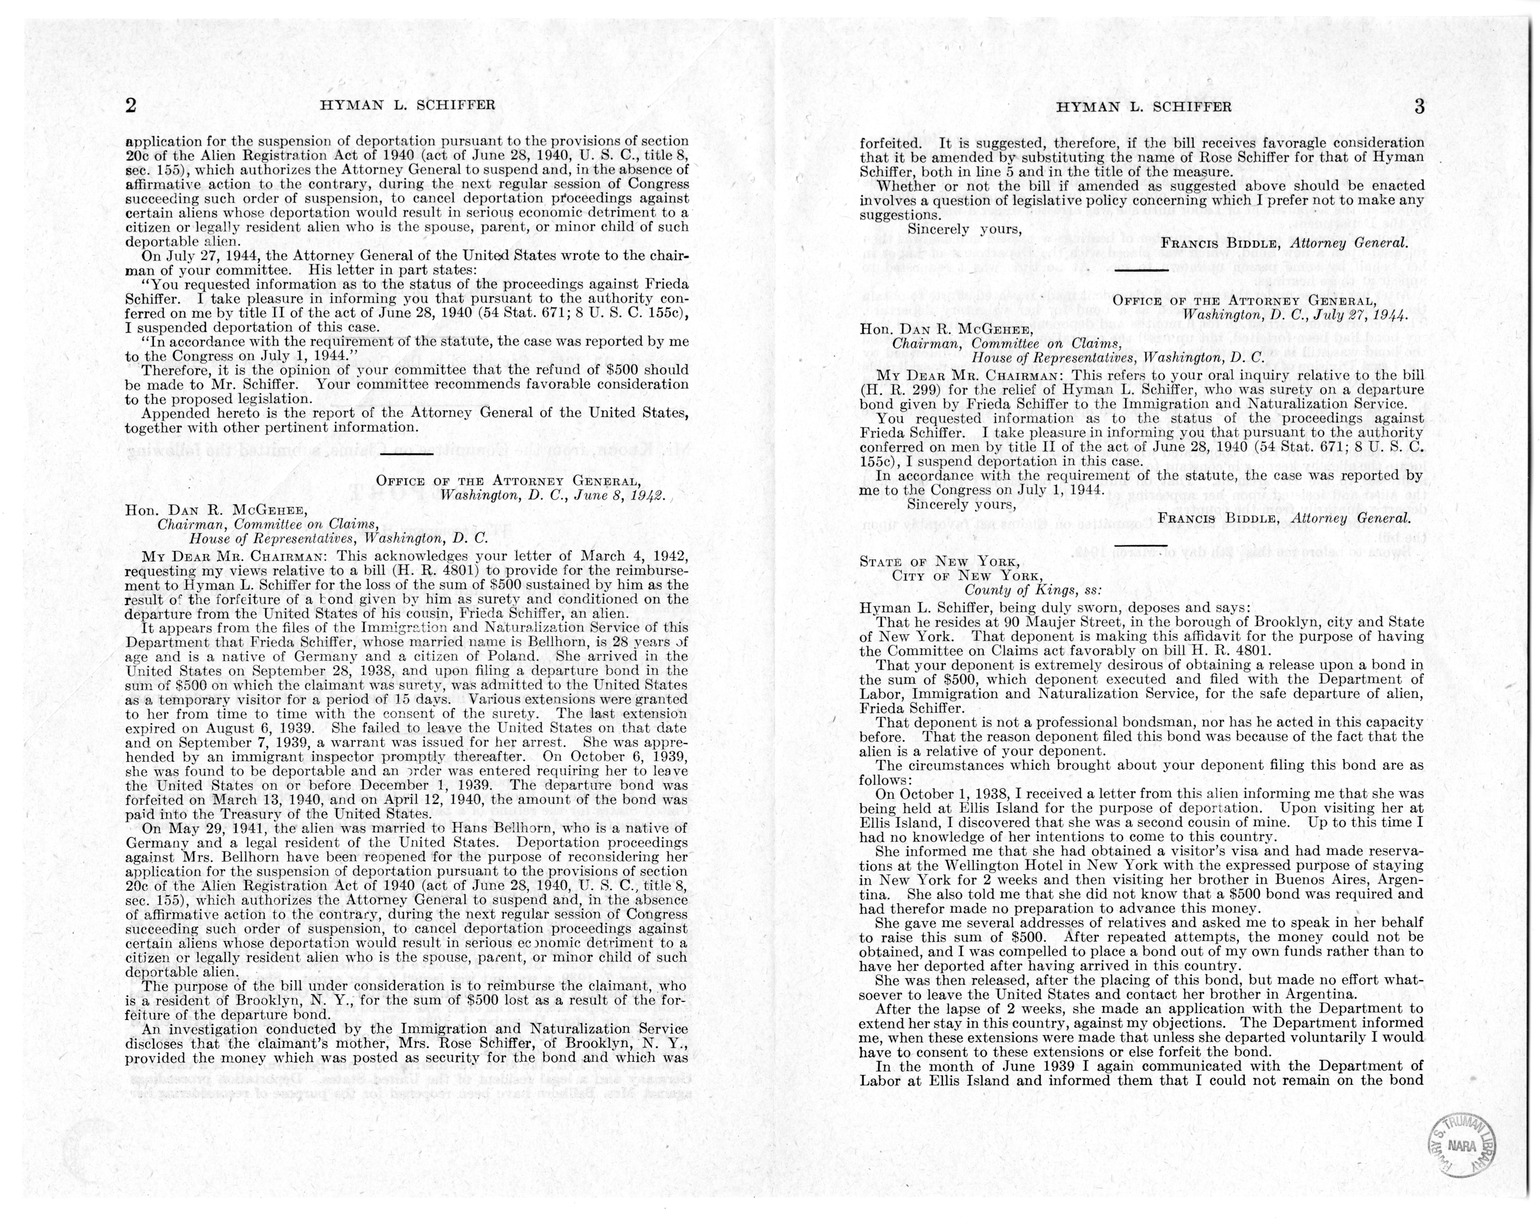 Memorandum from Frederick J. Bailey to M. C. Latta, H. R. 1325, for the Relief of Mrs. Rose Schiffer, with Attachments